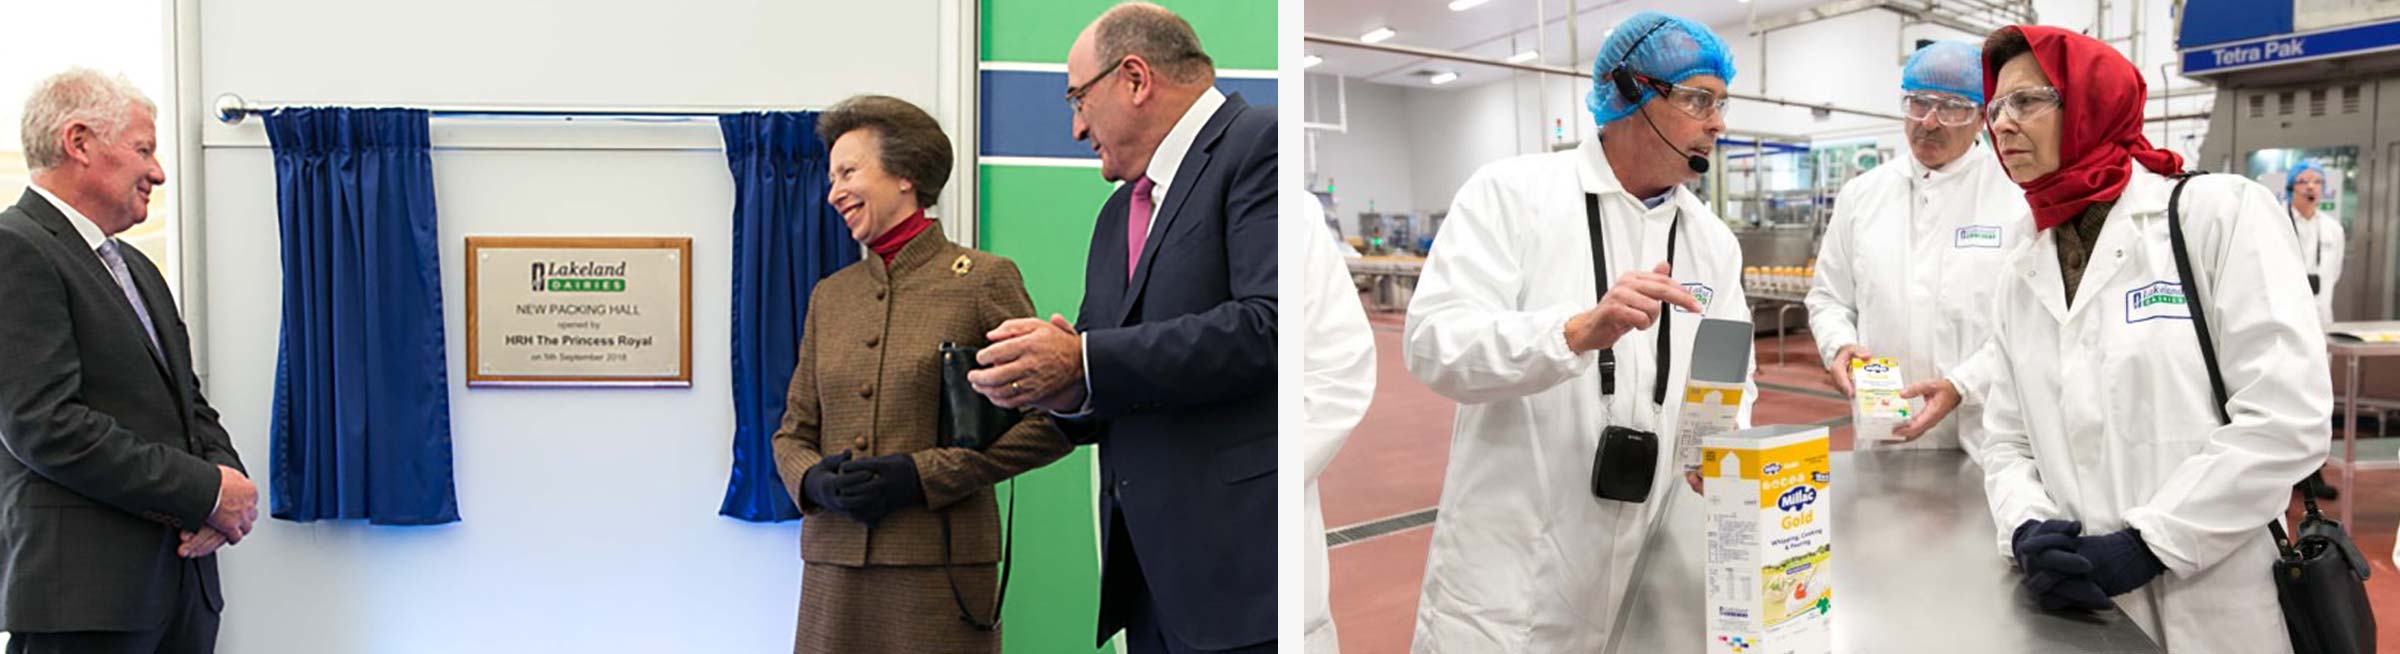 Visit by HRH Anne, the Princess Royal to Lakeland Dairies Newtonards factory in Northern Ireland